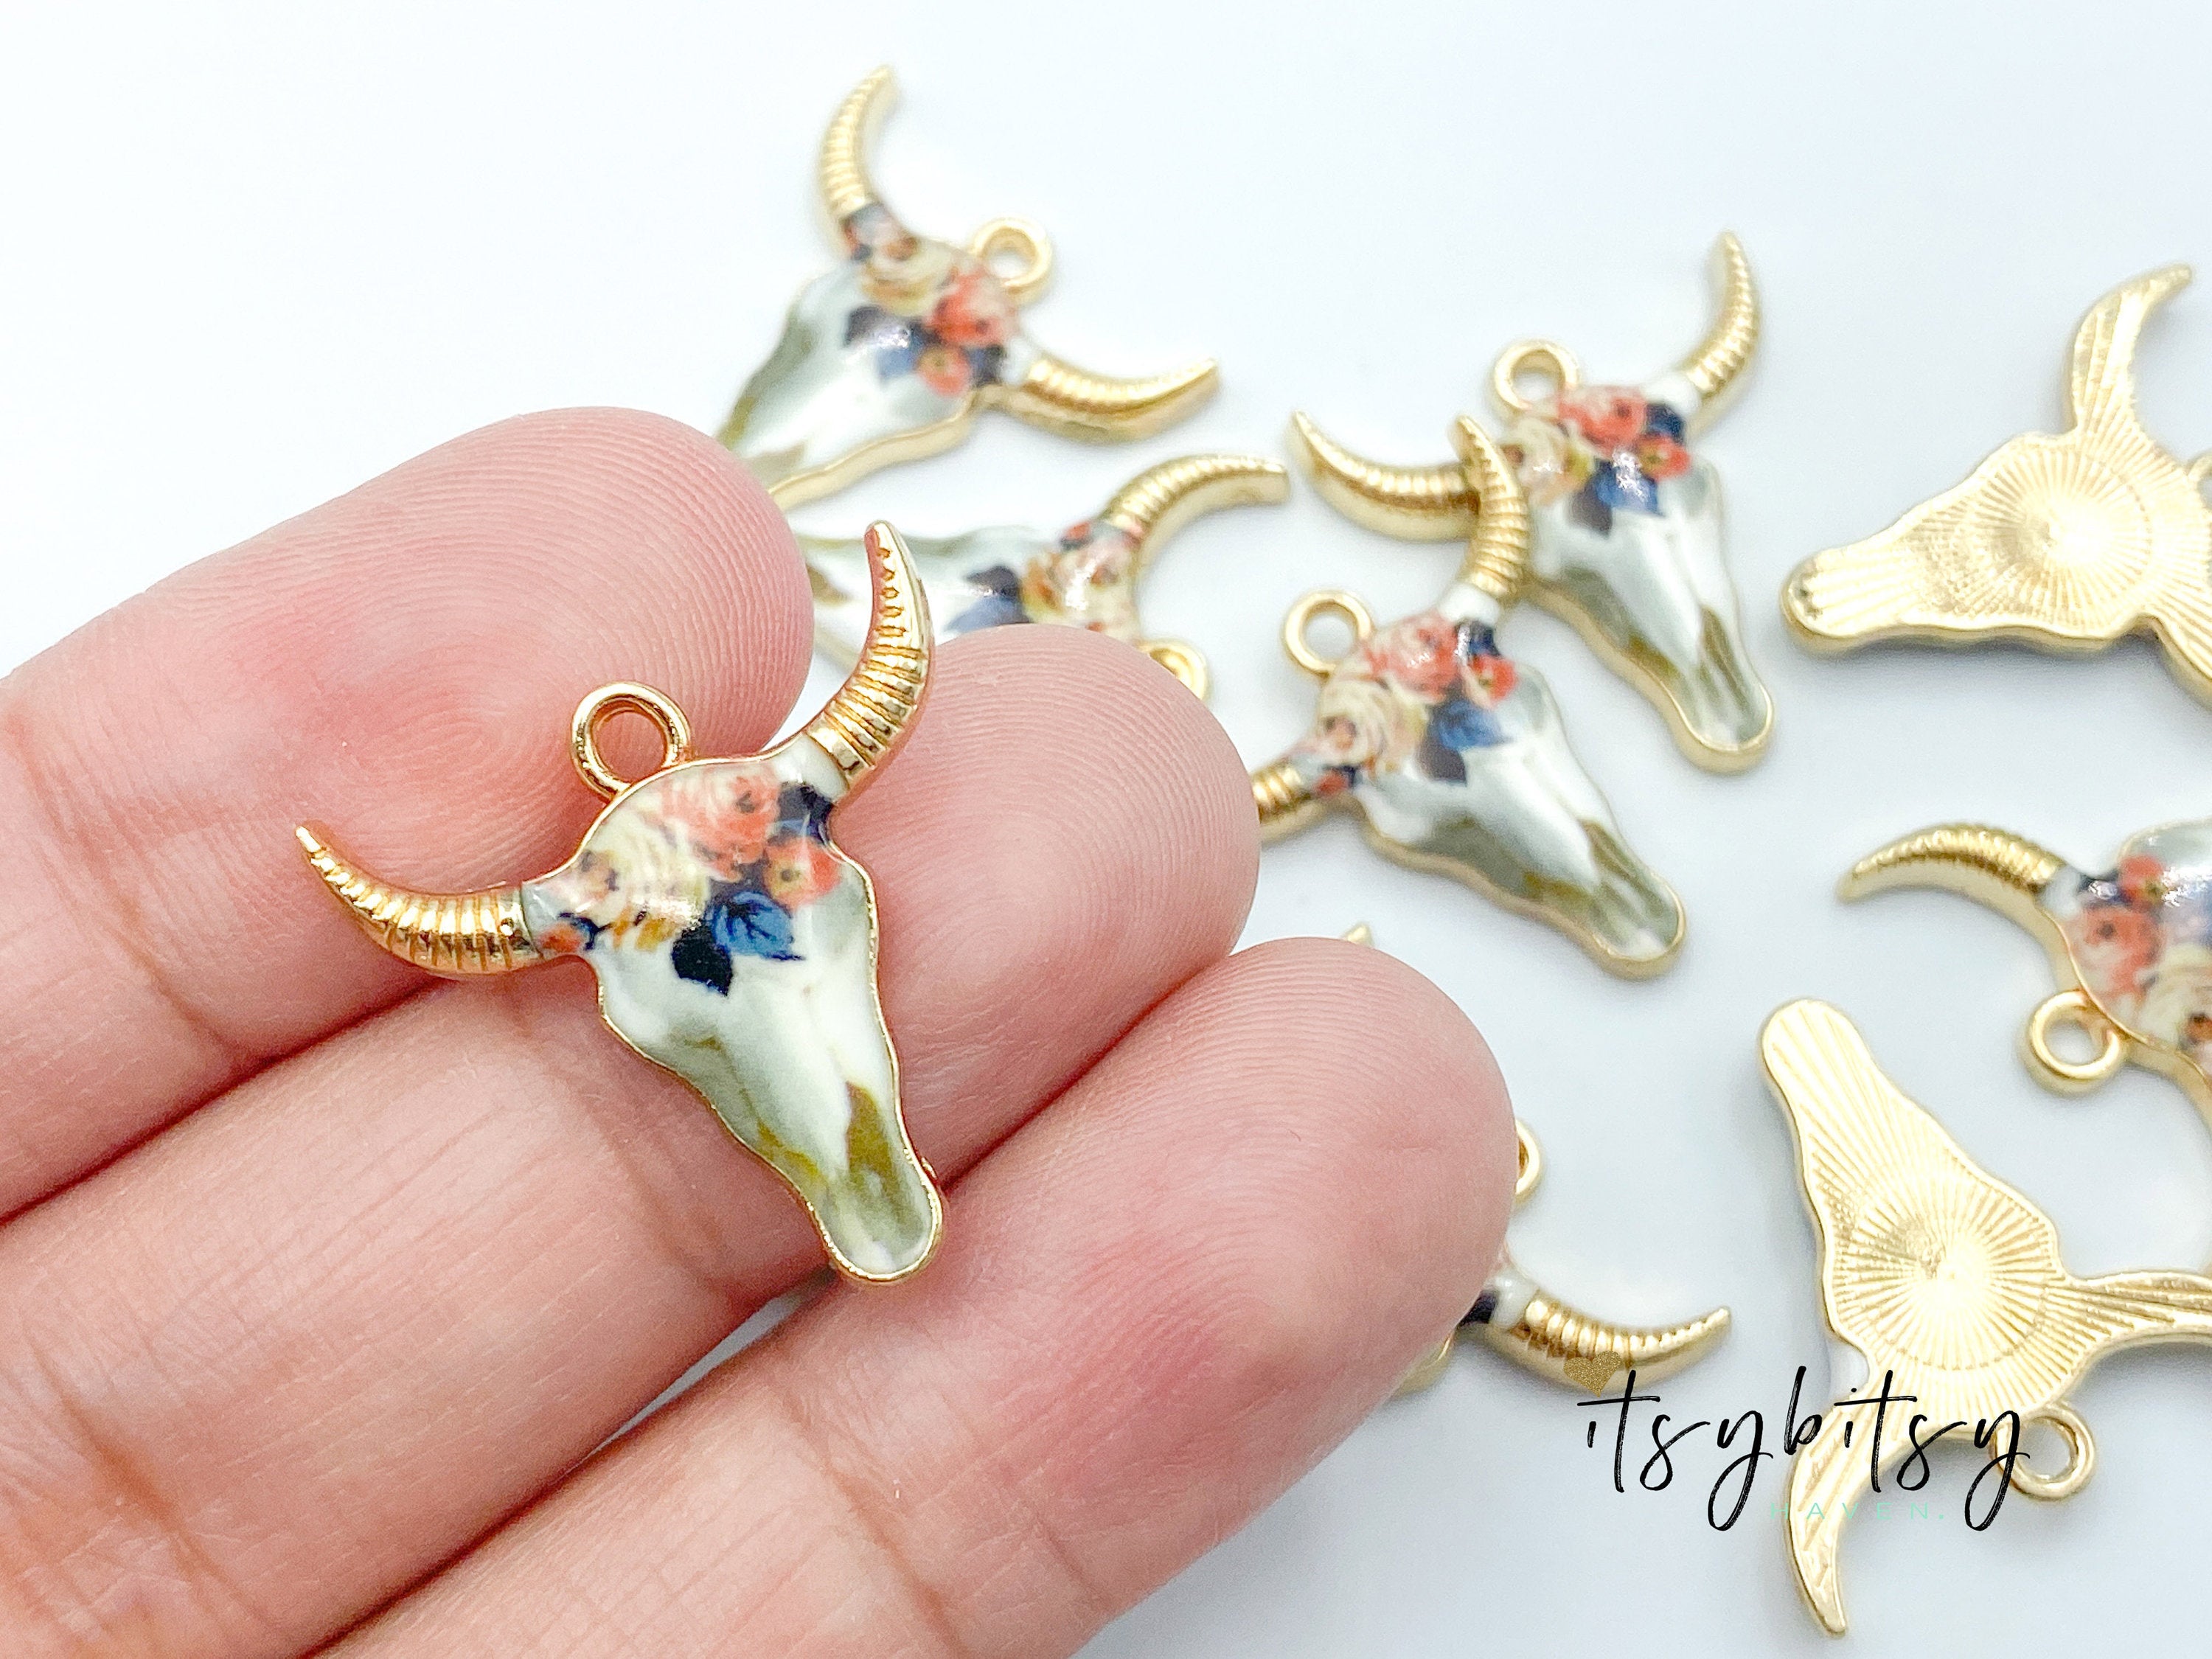 2pcs, 22x21mm, Zinc Based Alloy Bohemian Boho Charms Bull Cow Animal charm in Gold Plating, Blush and Blue Floral Enamel